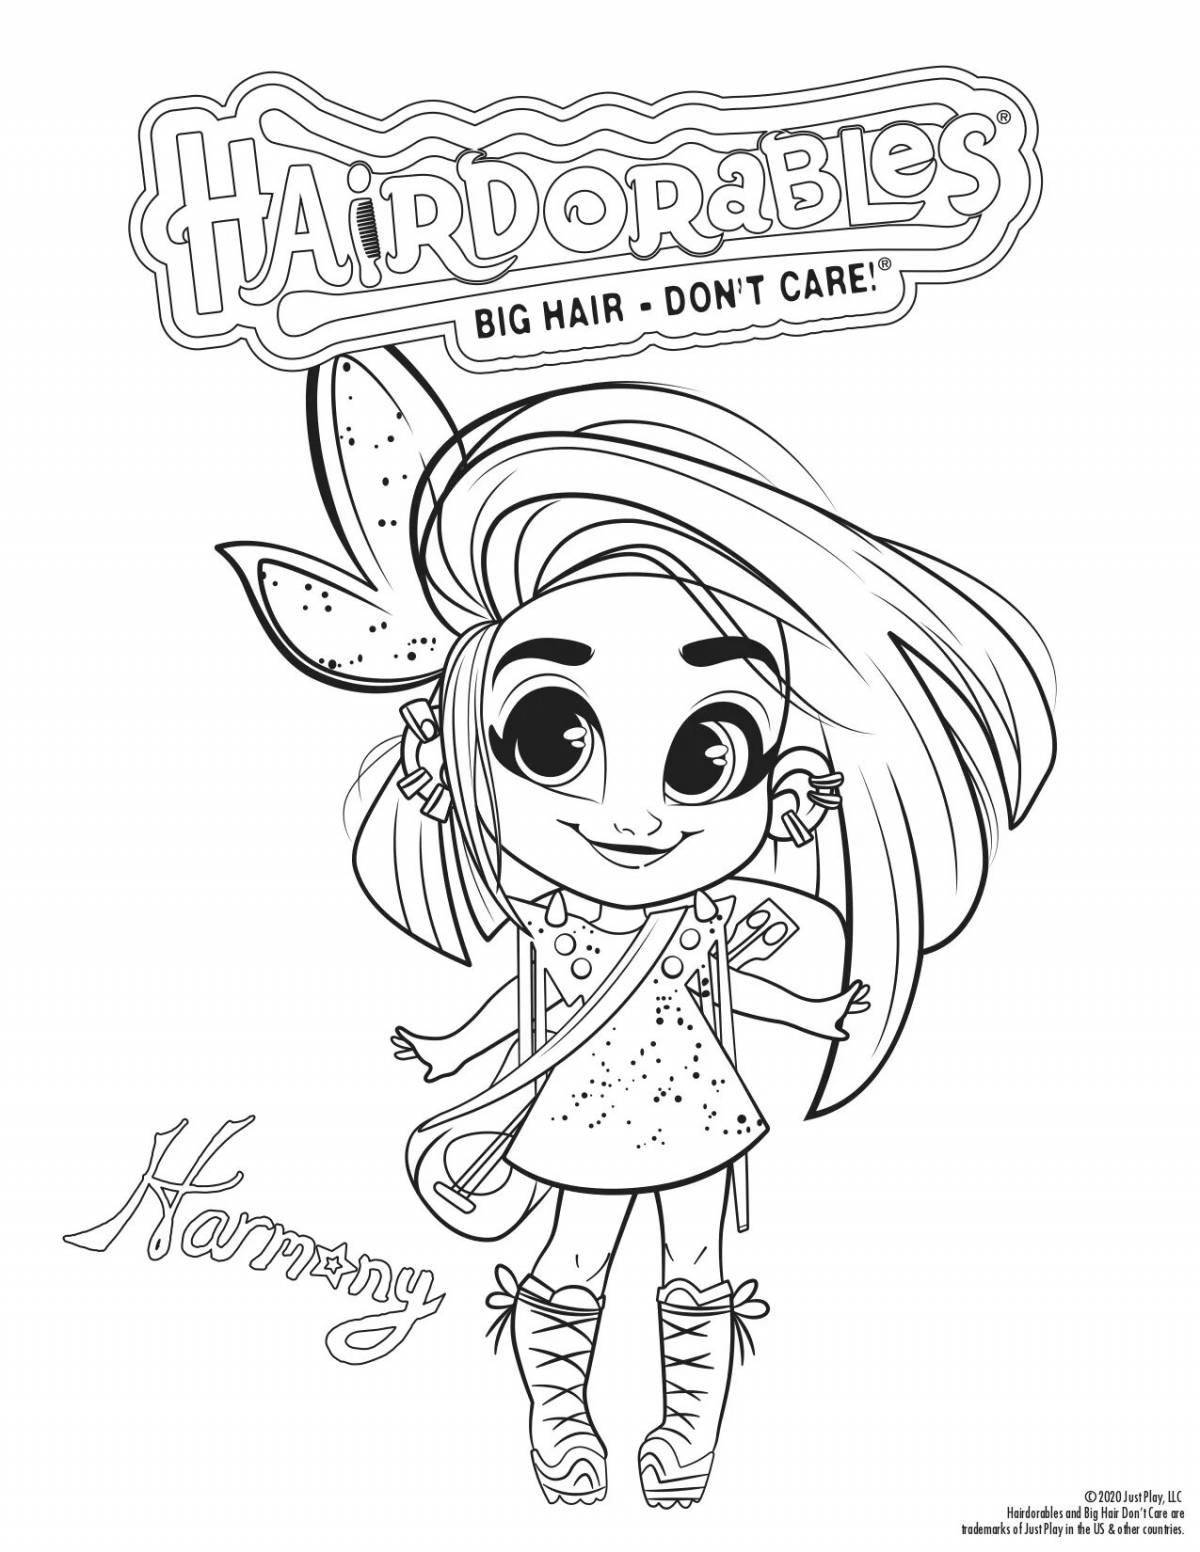 Colorful hairdorables coloring page